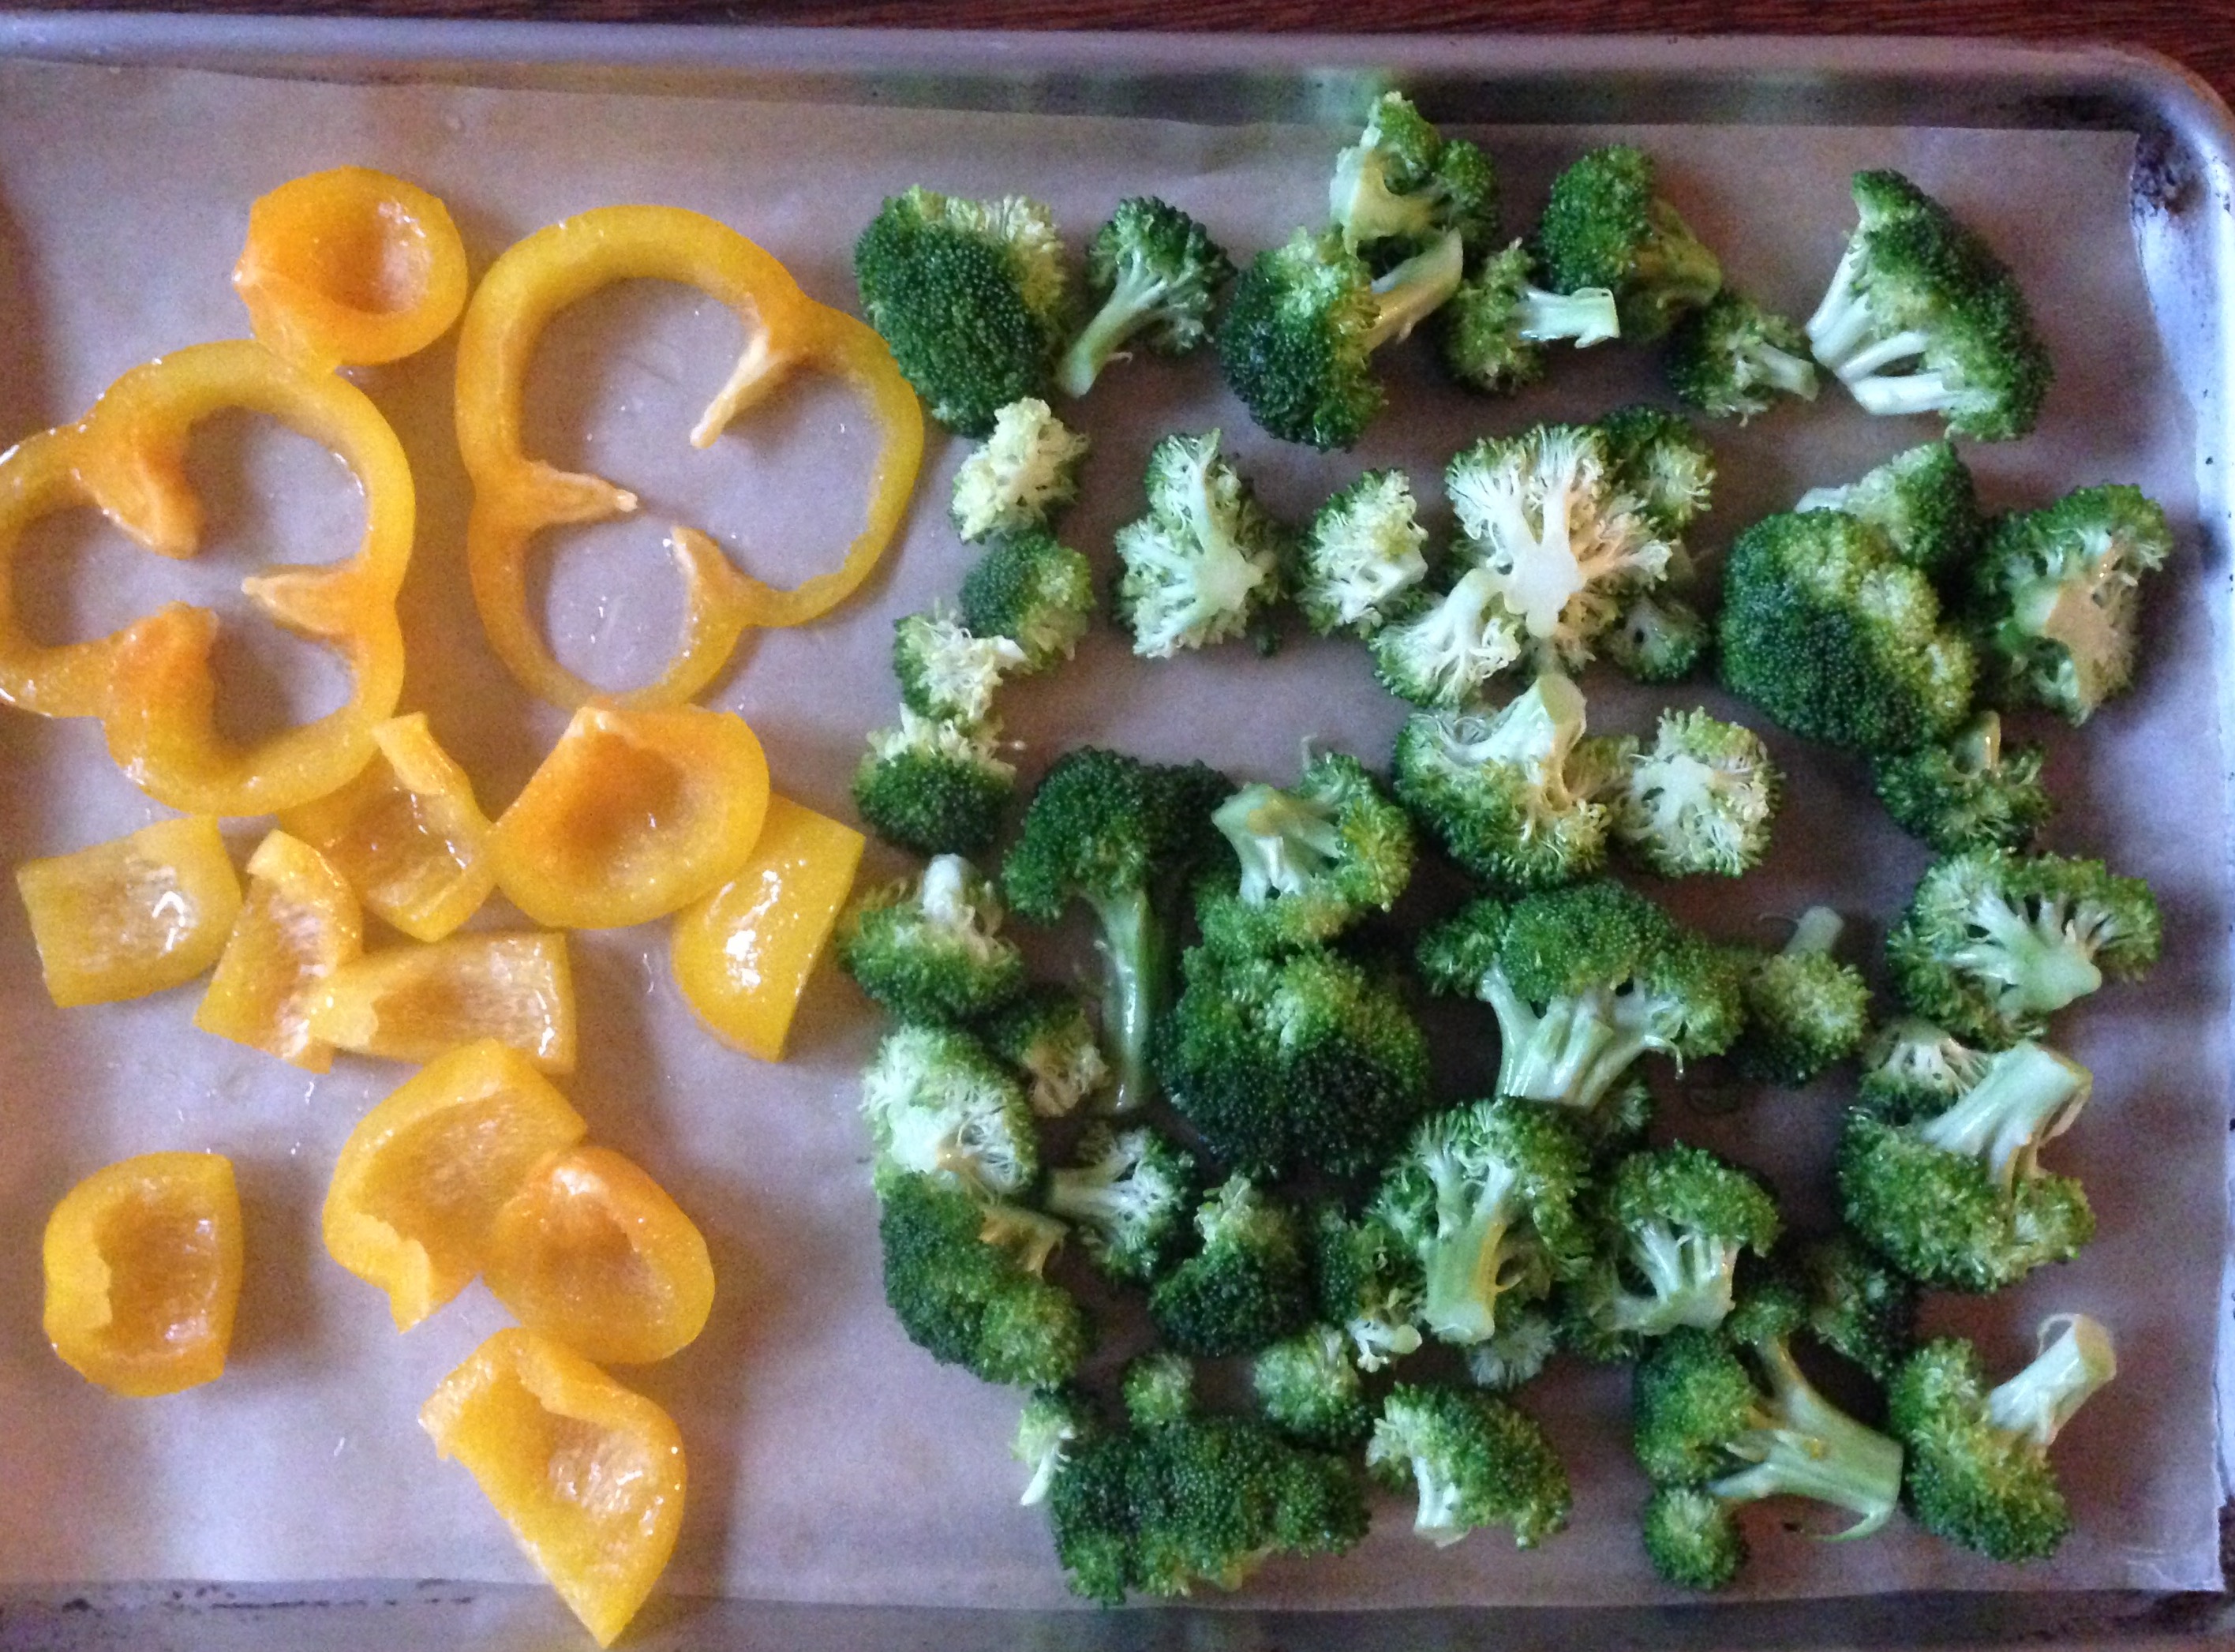 Broccoli and Bell Peppers Ready to Roast